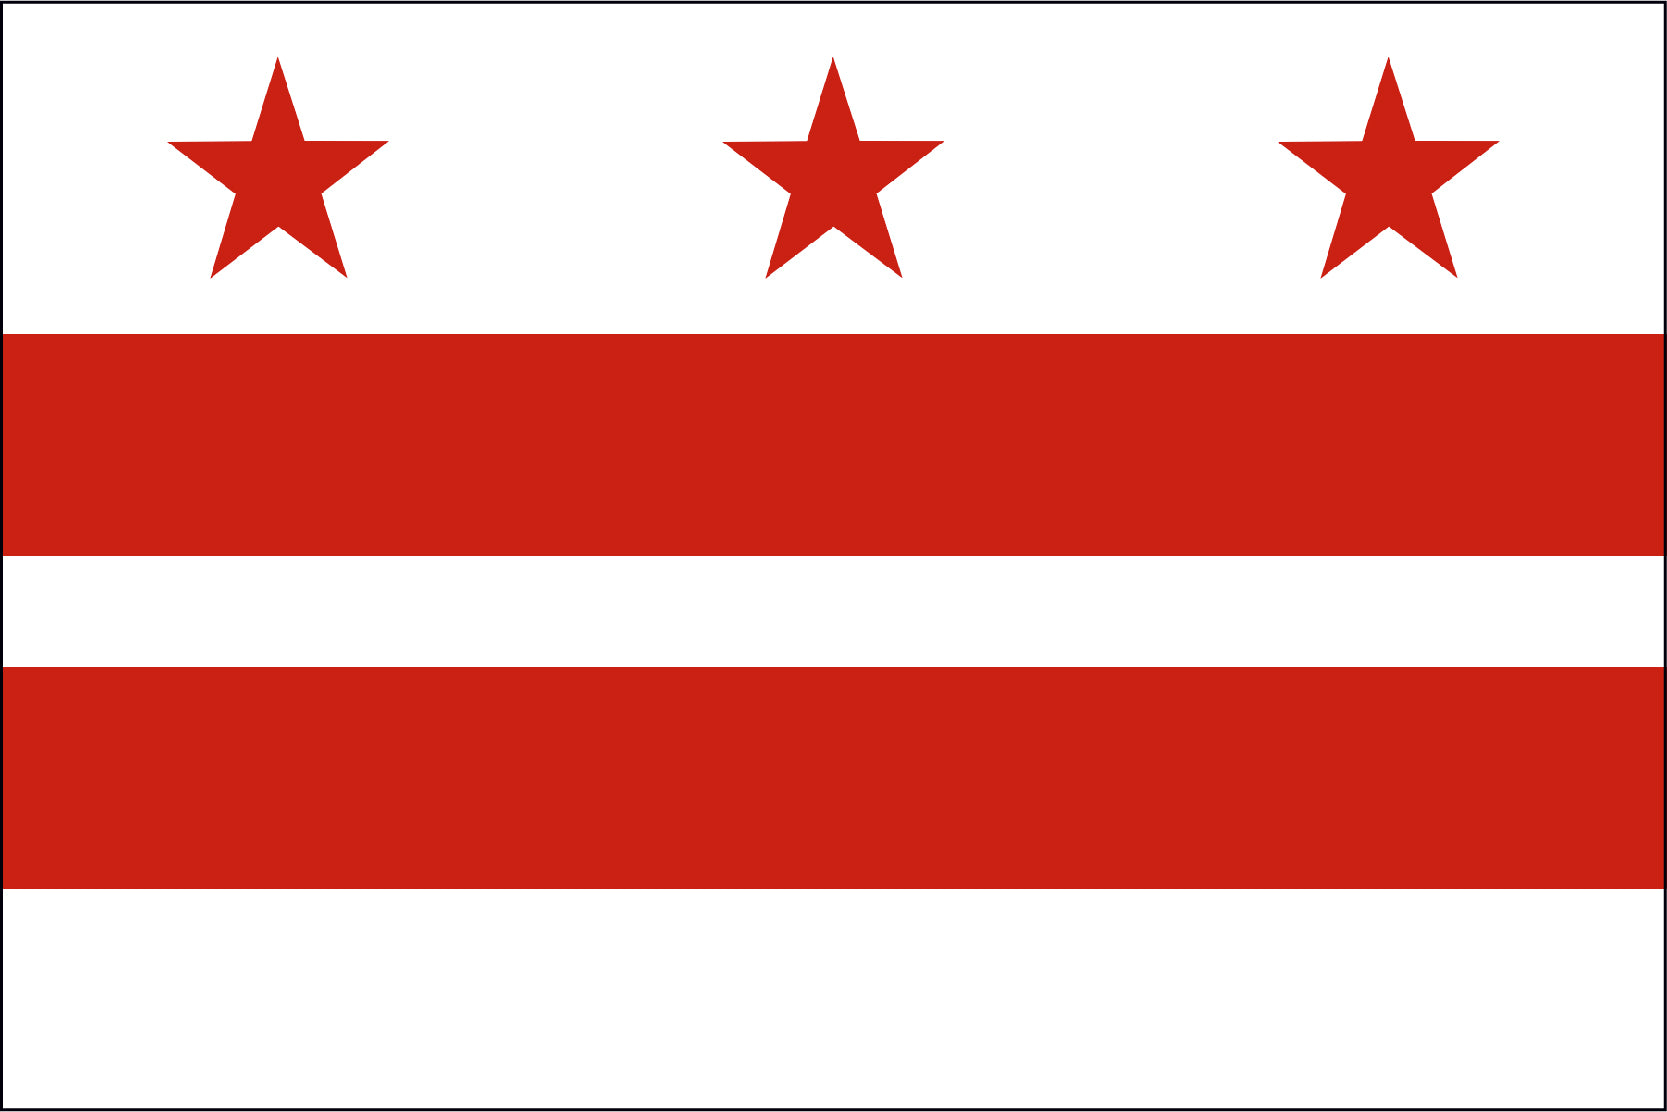 District of Columbia